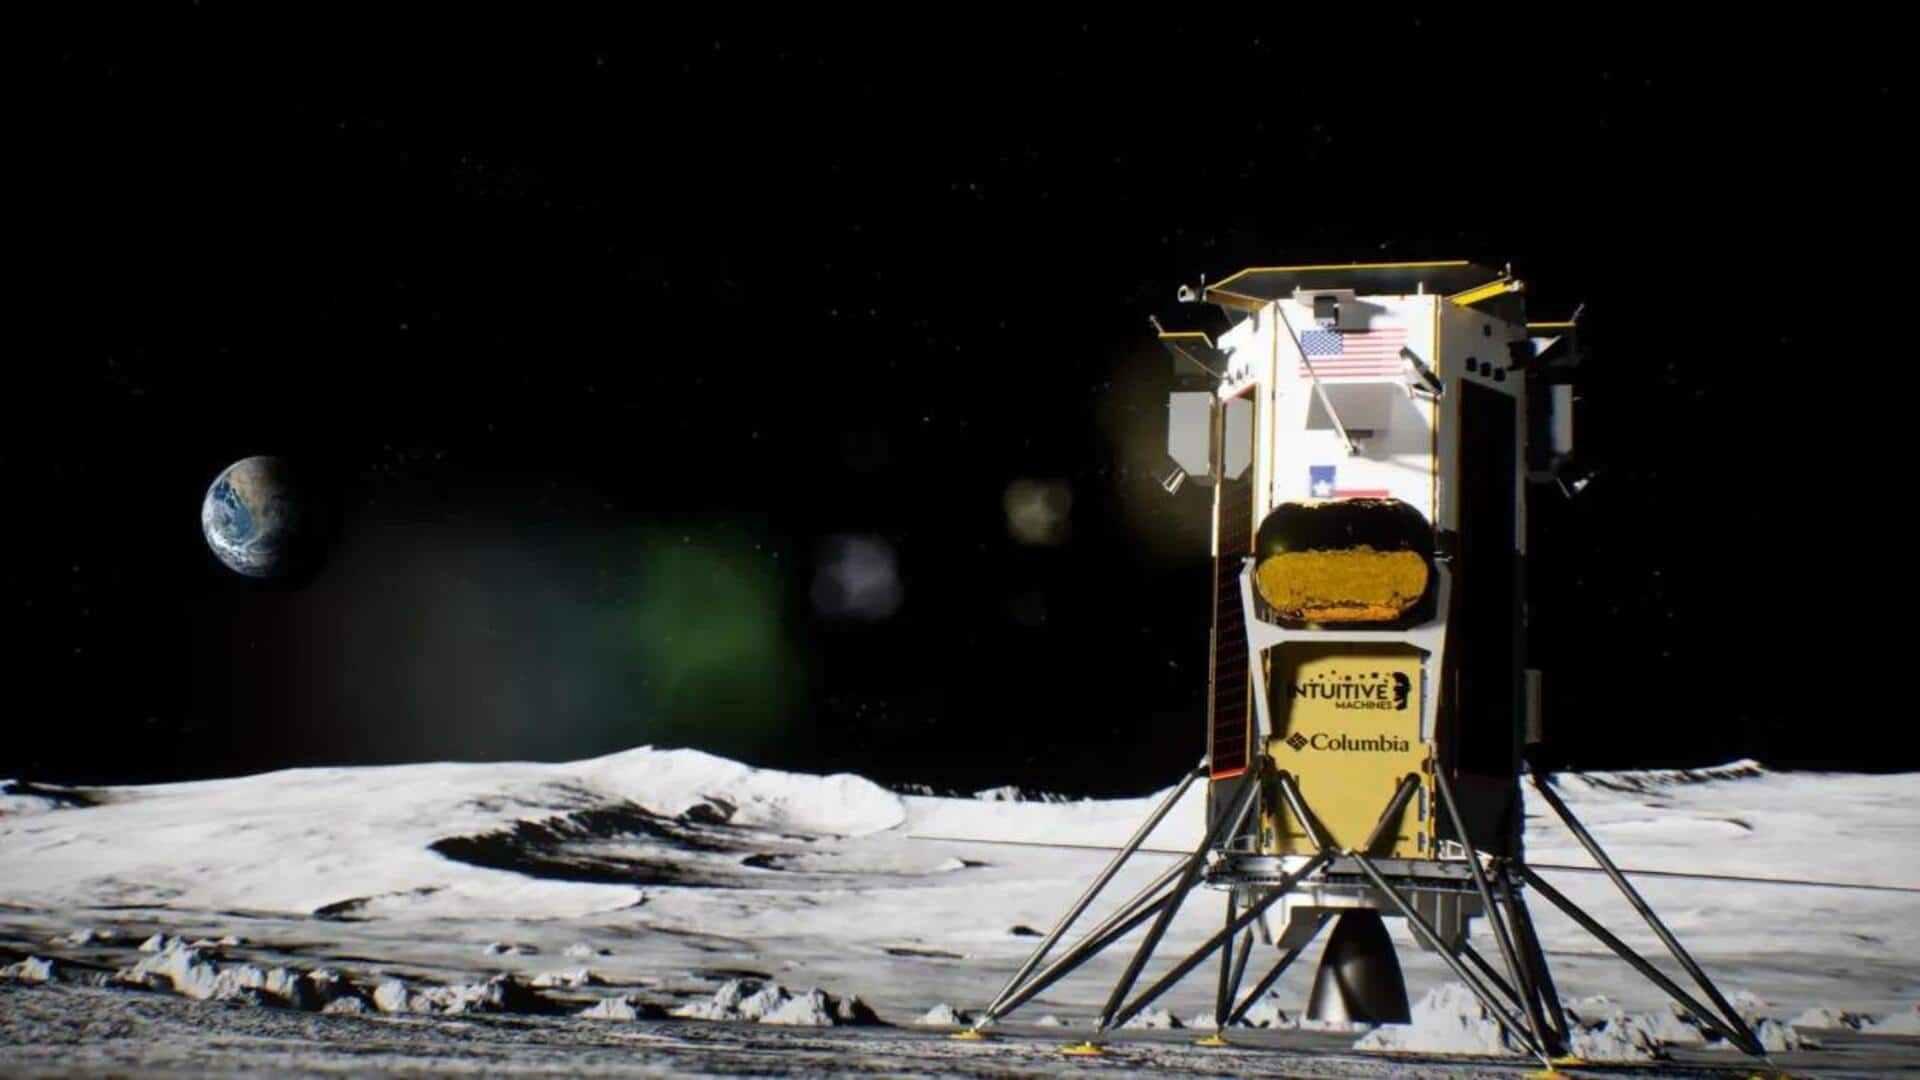 Odysseus spacecraft launched by SpaceX blasts off to the Moon